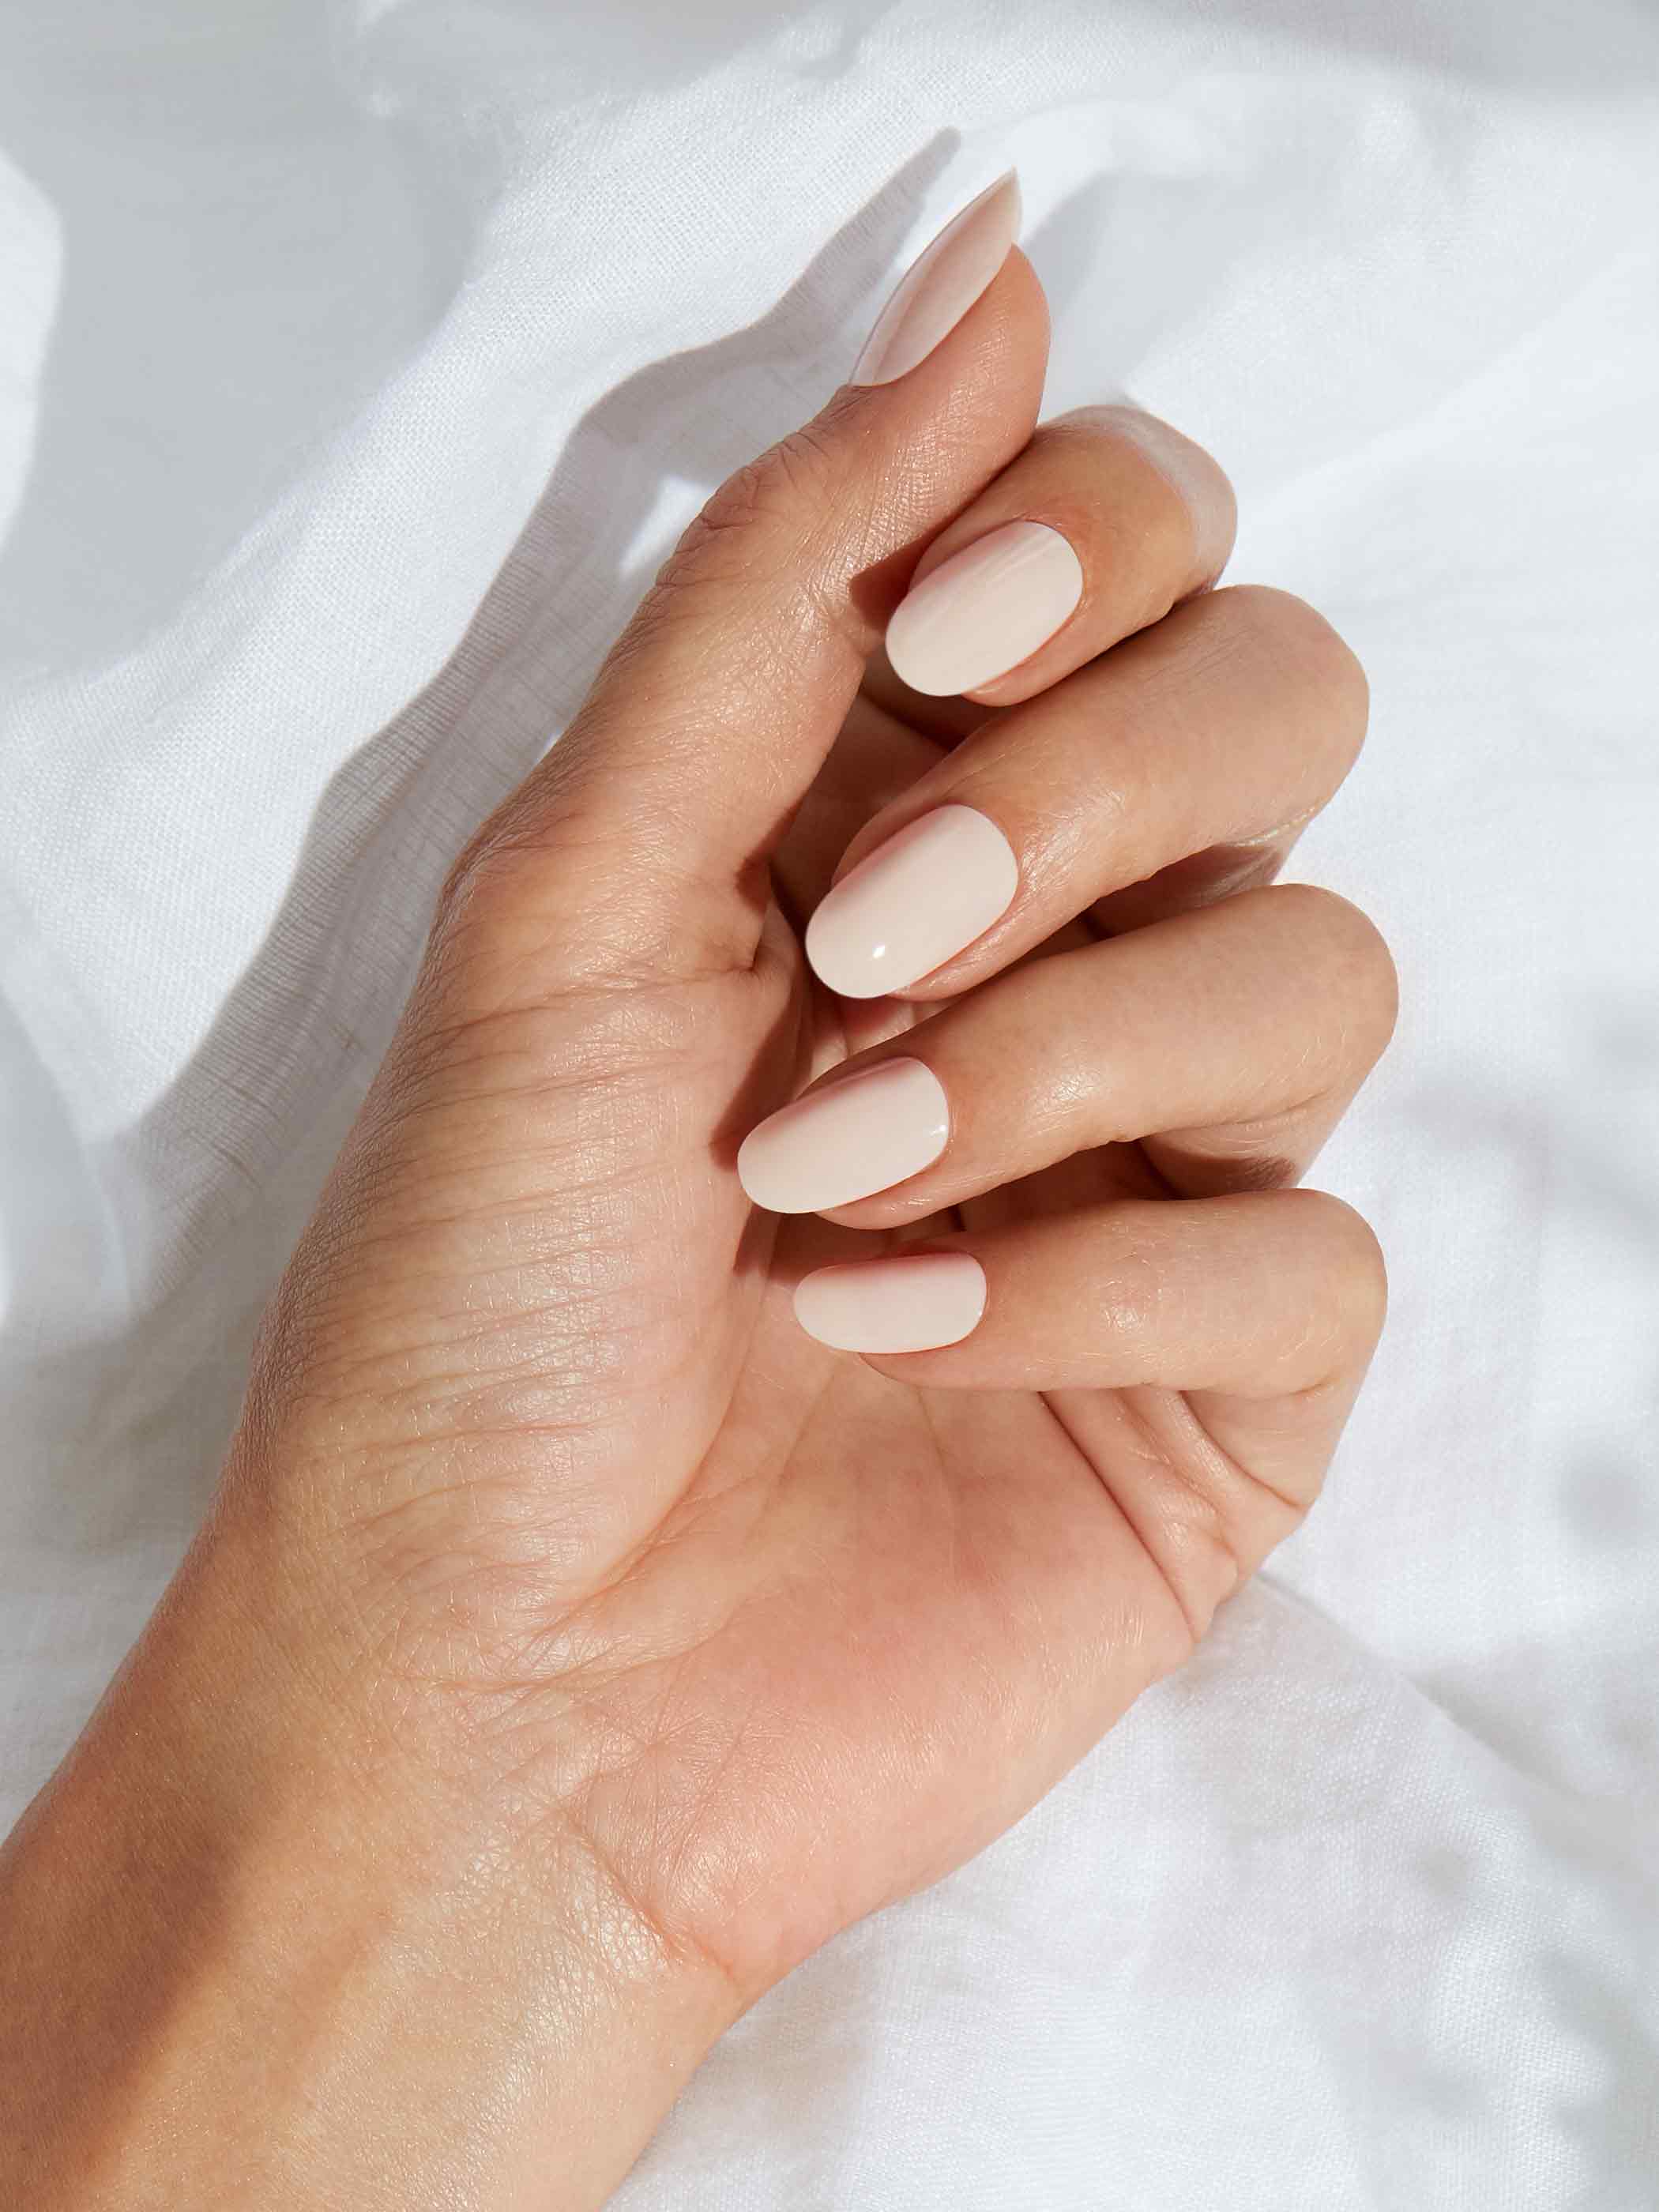 The EASIEST way to sugar nails that LAST! 